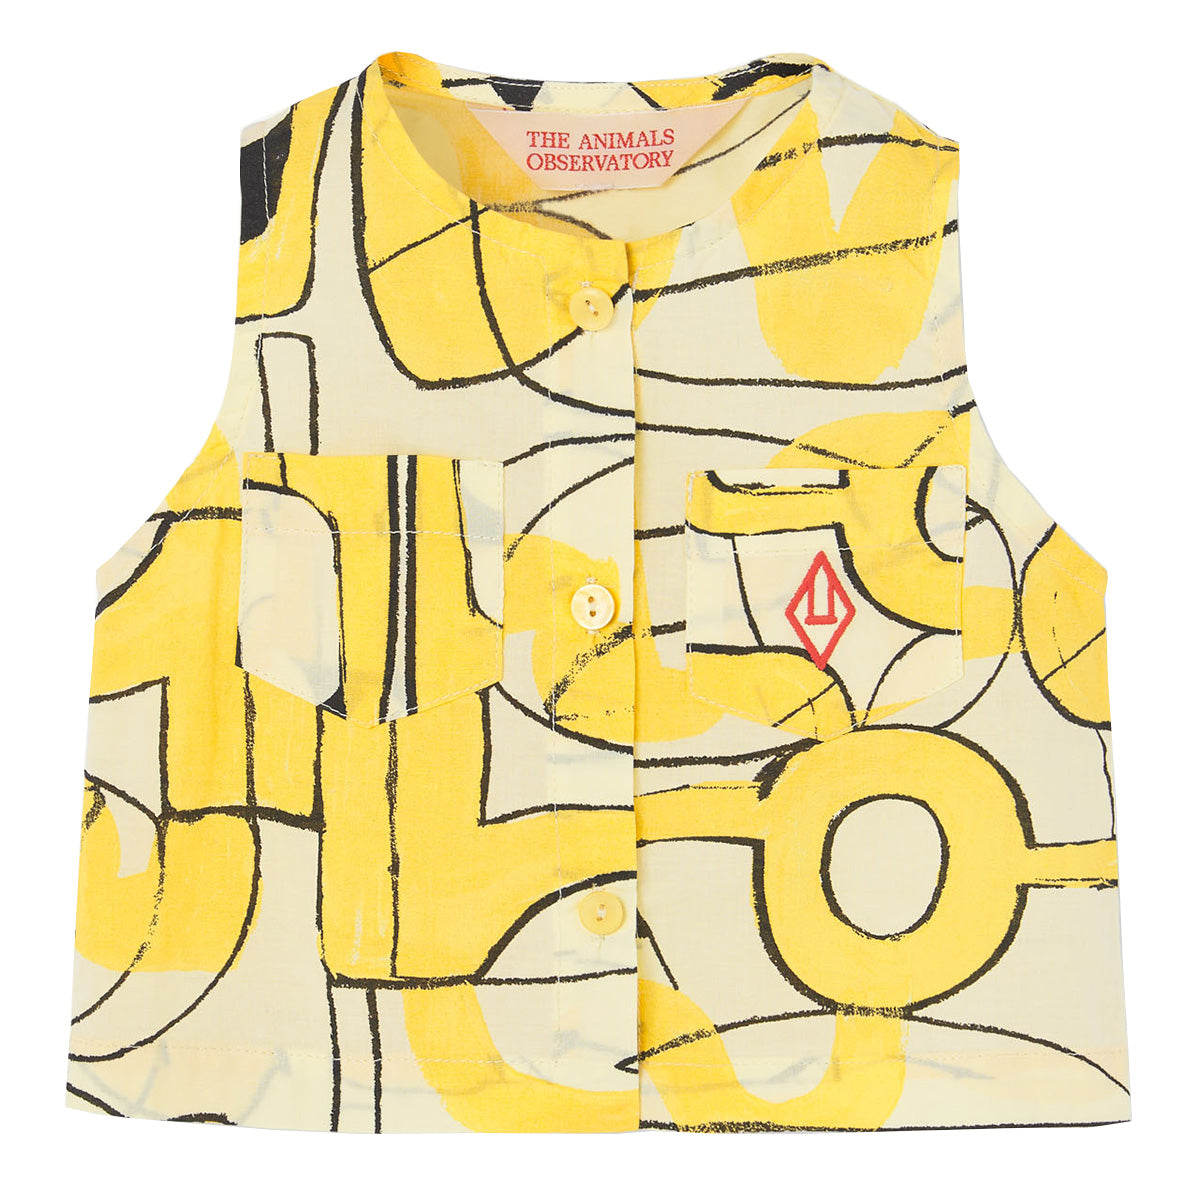 The Baboon Baby Sleeveless Shirt from The Animals Observatory in soft yellow color displays a gorgeous